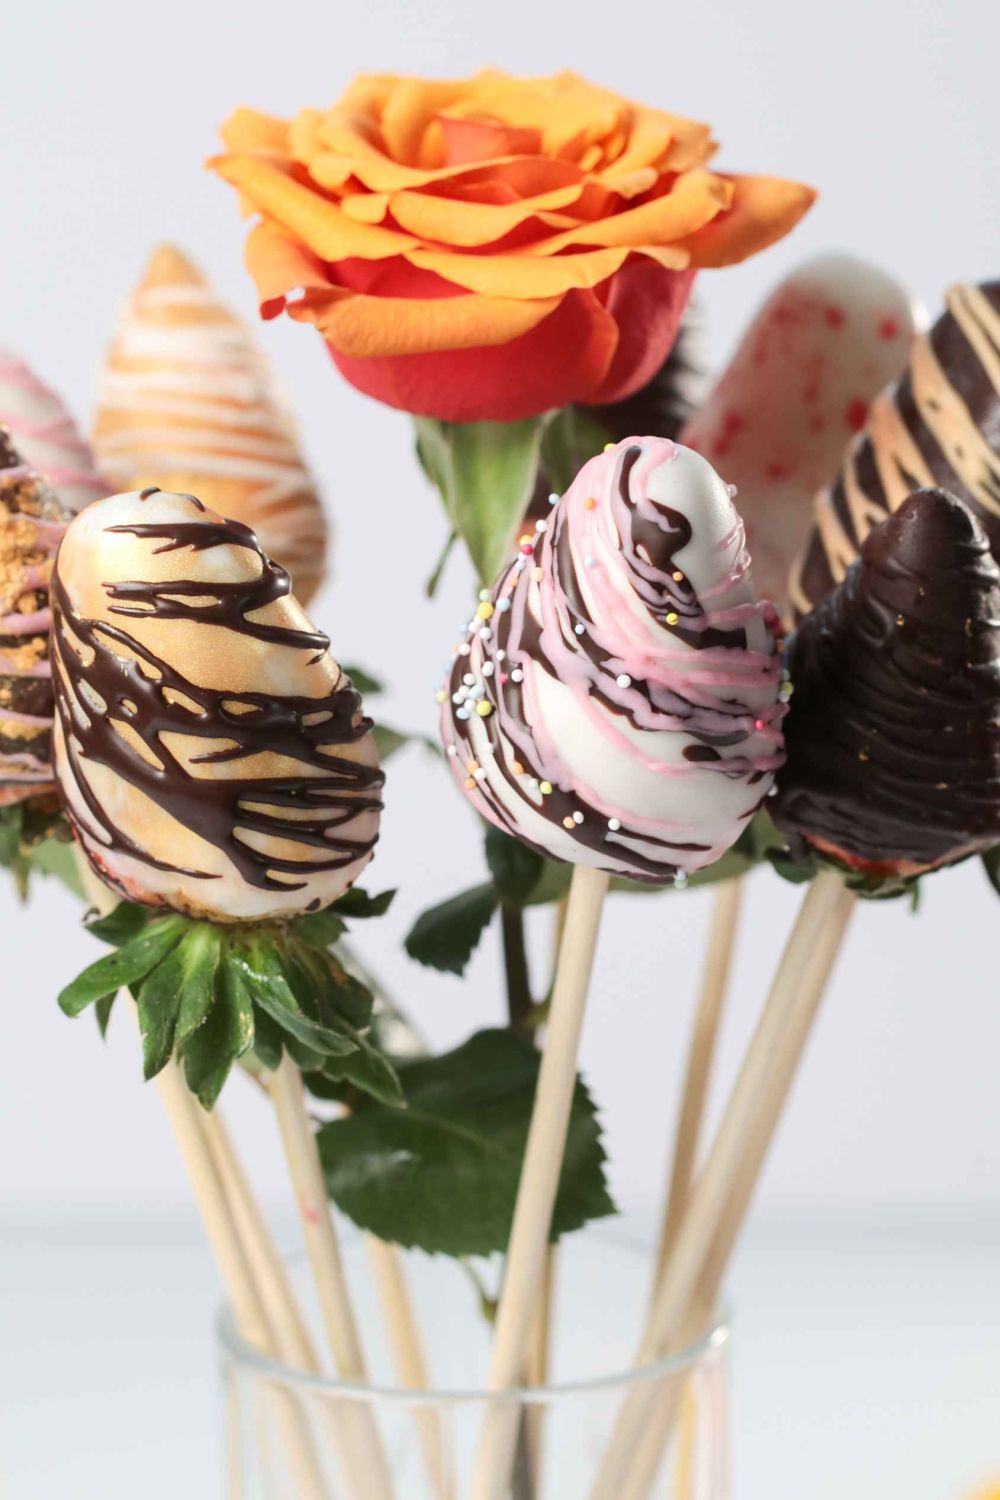 Diy chocolate covered strawberry bouquet